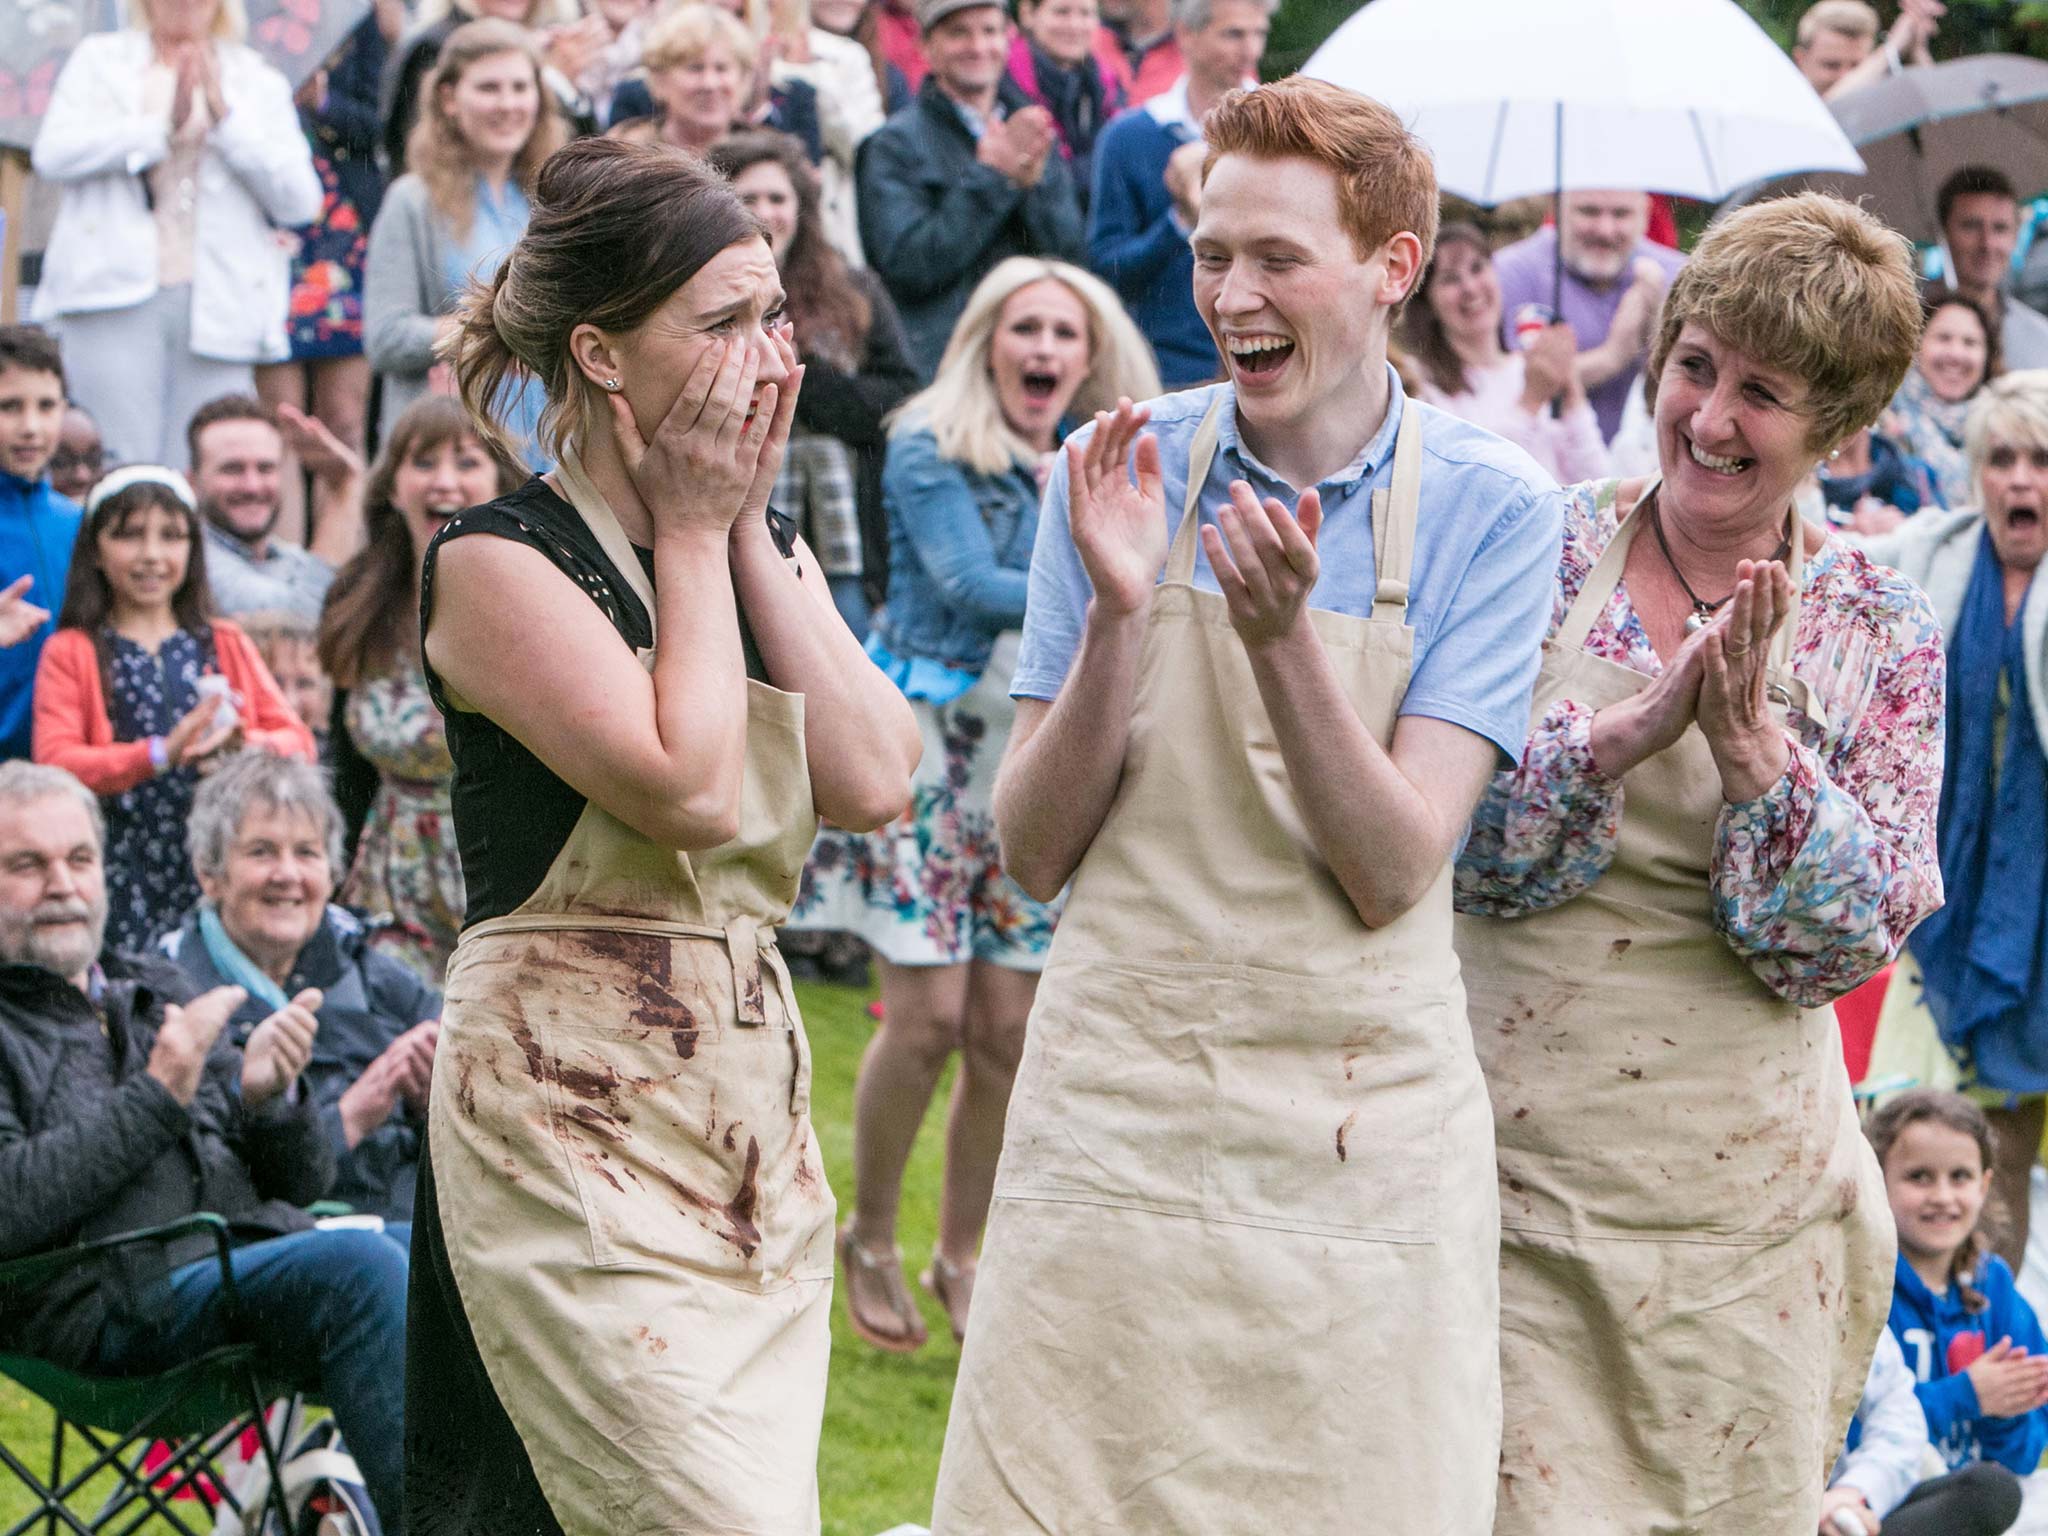 The 2016 Great British Bake Off final recieved an audience of 14 million, the final series before a multi-million pound move to Channel 4